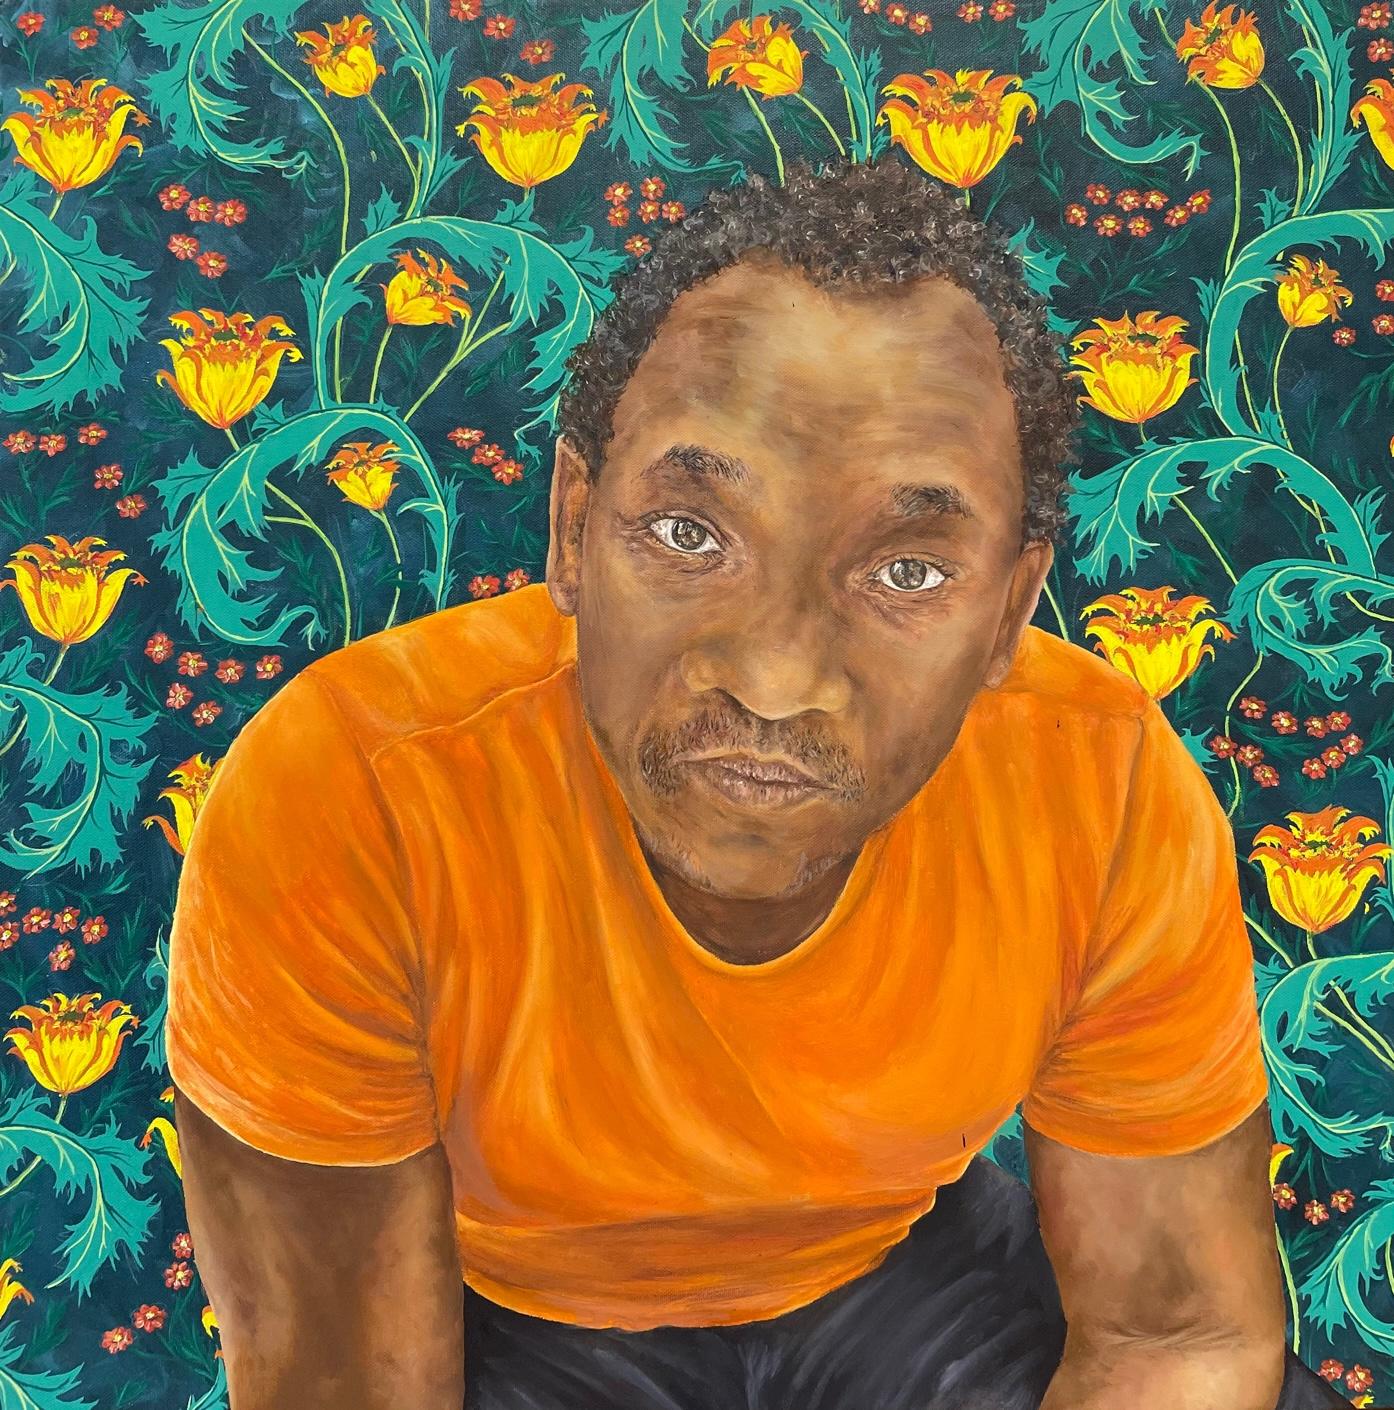 A painting of a man looking directly at the audience, against a vibrant patterned background, wearing a bright orange t-shirt.